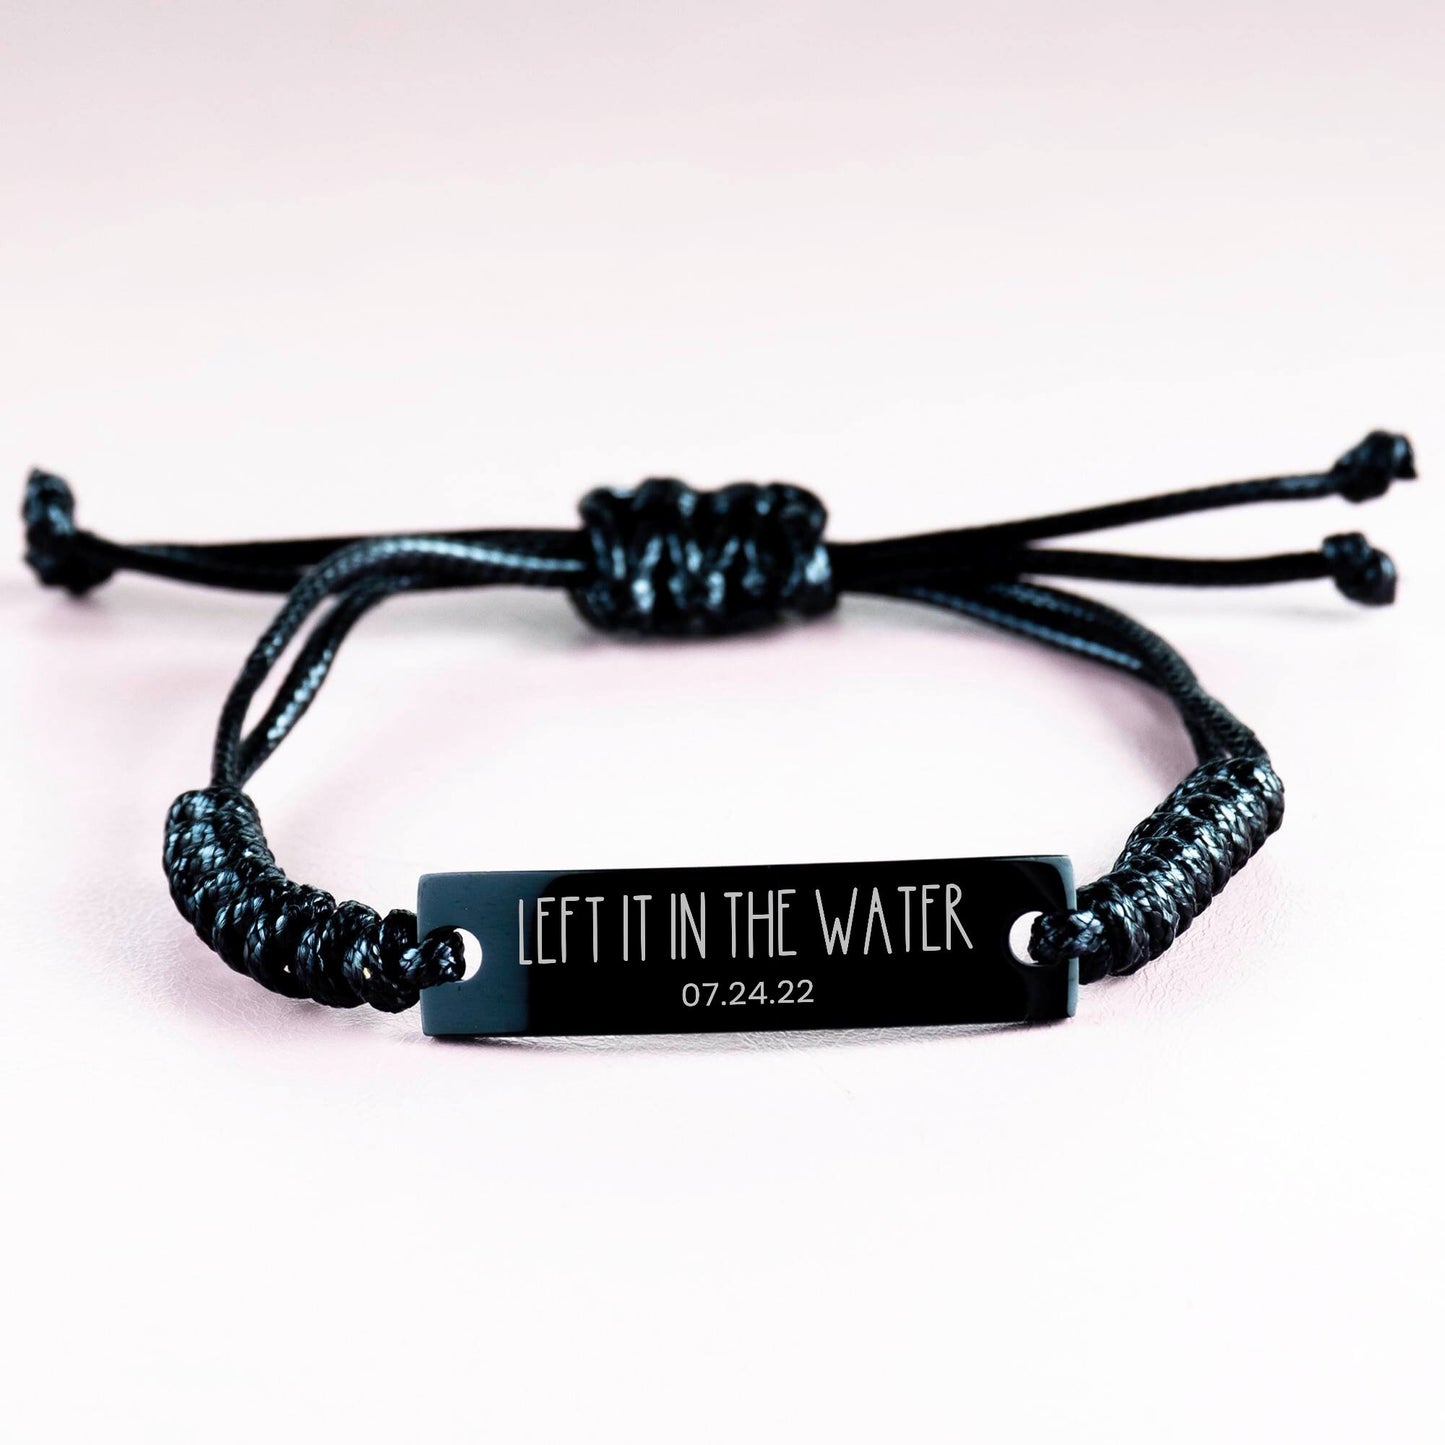 Left It in The Water Bracelet, Baptism Gift Teen Boy Girl Adult, Personalized Baptism Date Rope Bracelet, Baptized Bracelet